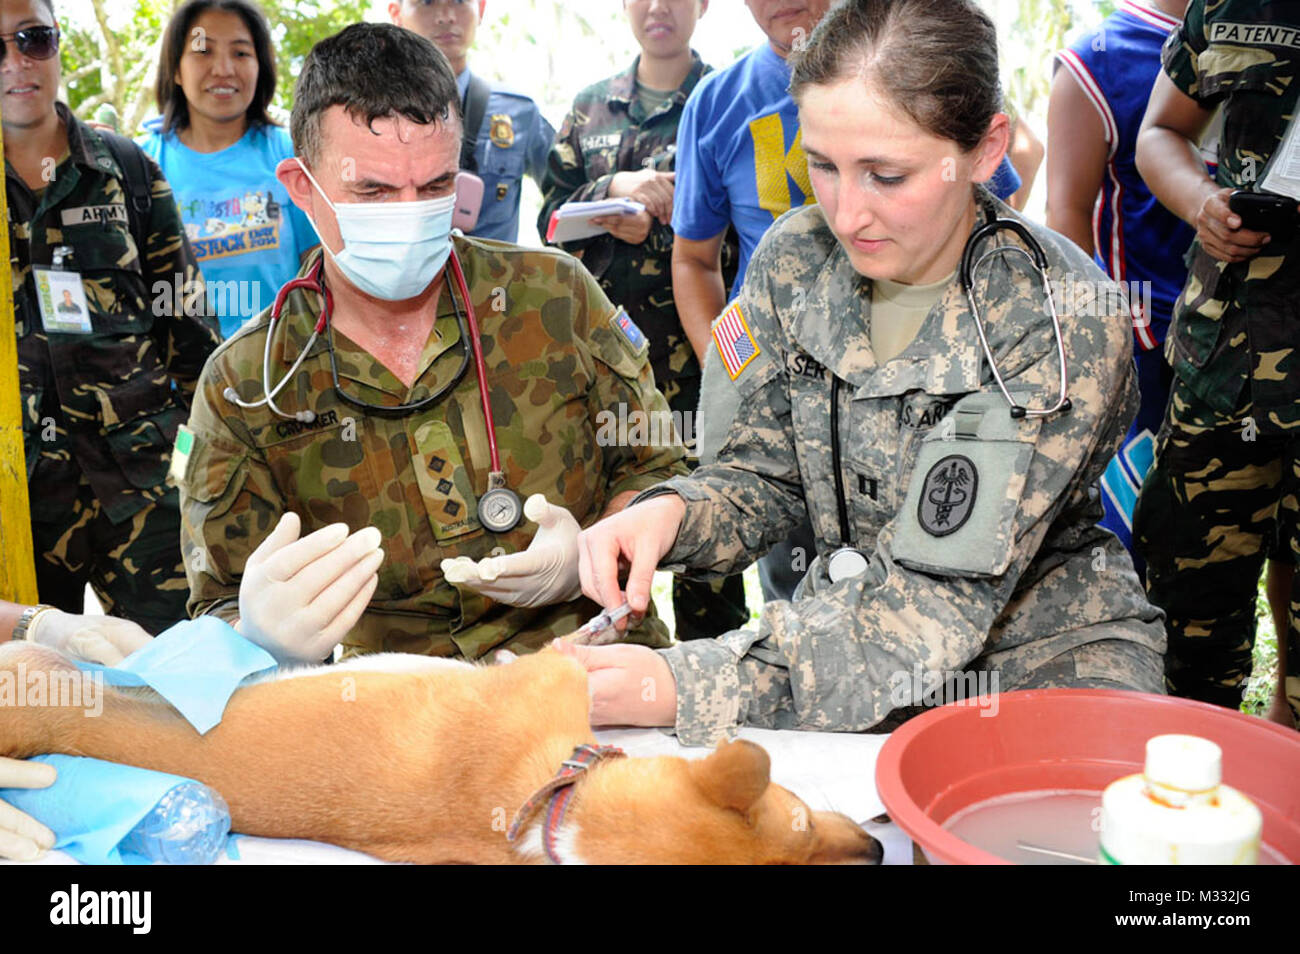 Australian Army Veterinarian, Captain Kendall Crocker, Observes United  States Army Veterinary Corps Officer, Captain Emily Elser, Giving A Dog An  Injection Prior To Surgery During A Veterinary Civil Assistance Program  Near Legazpi,